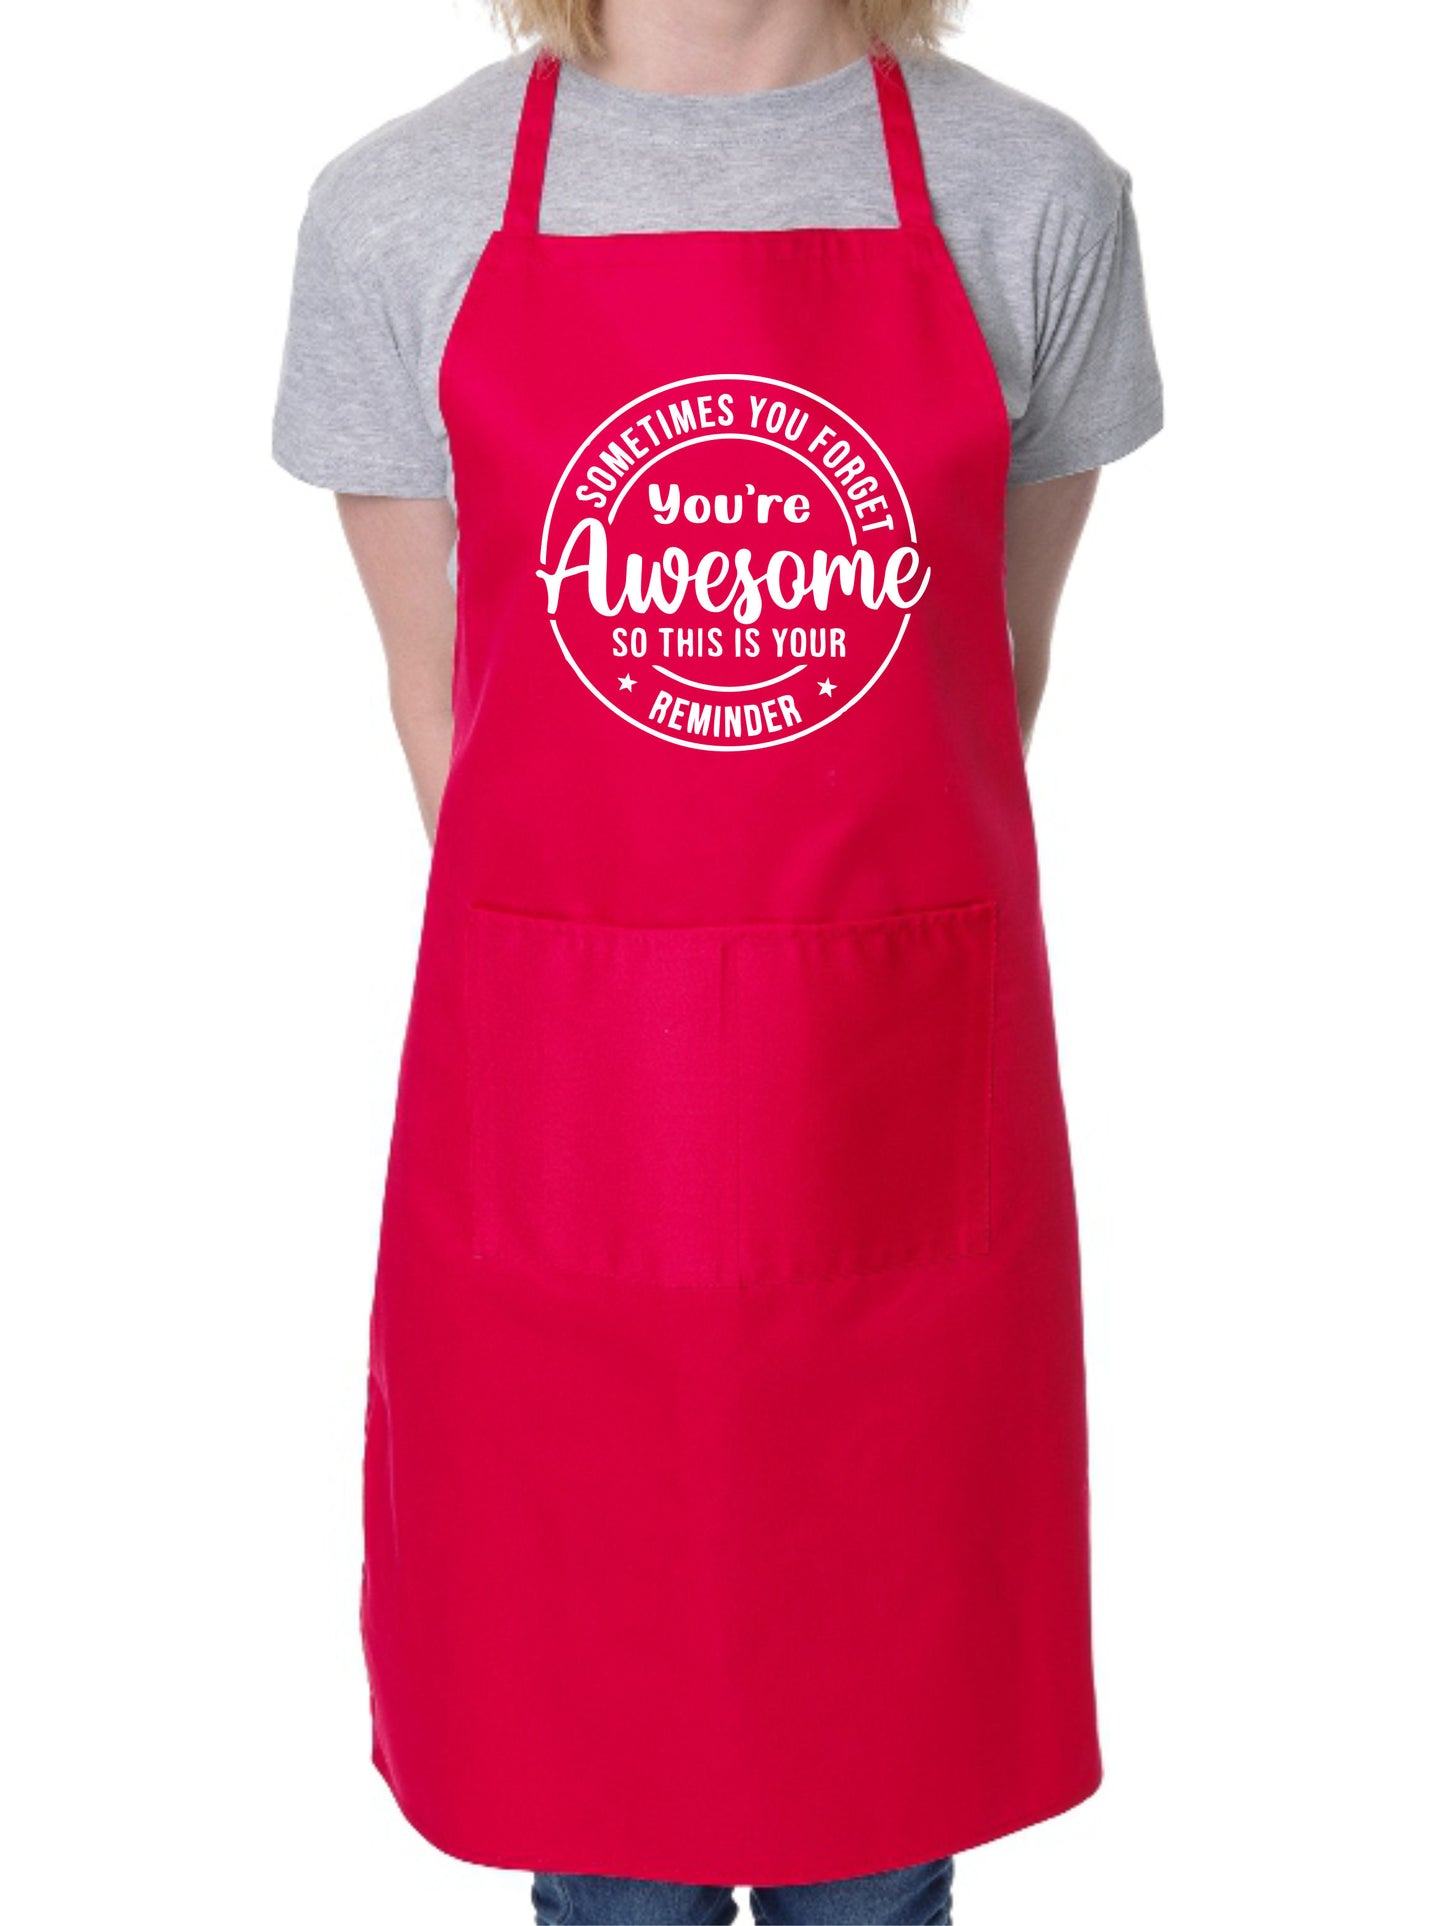 Sometimes You Forget Your Awesome Apron Funny Birthday Gift Cooking Baking BBQ